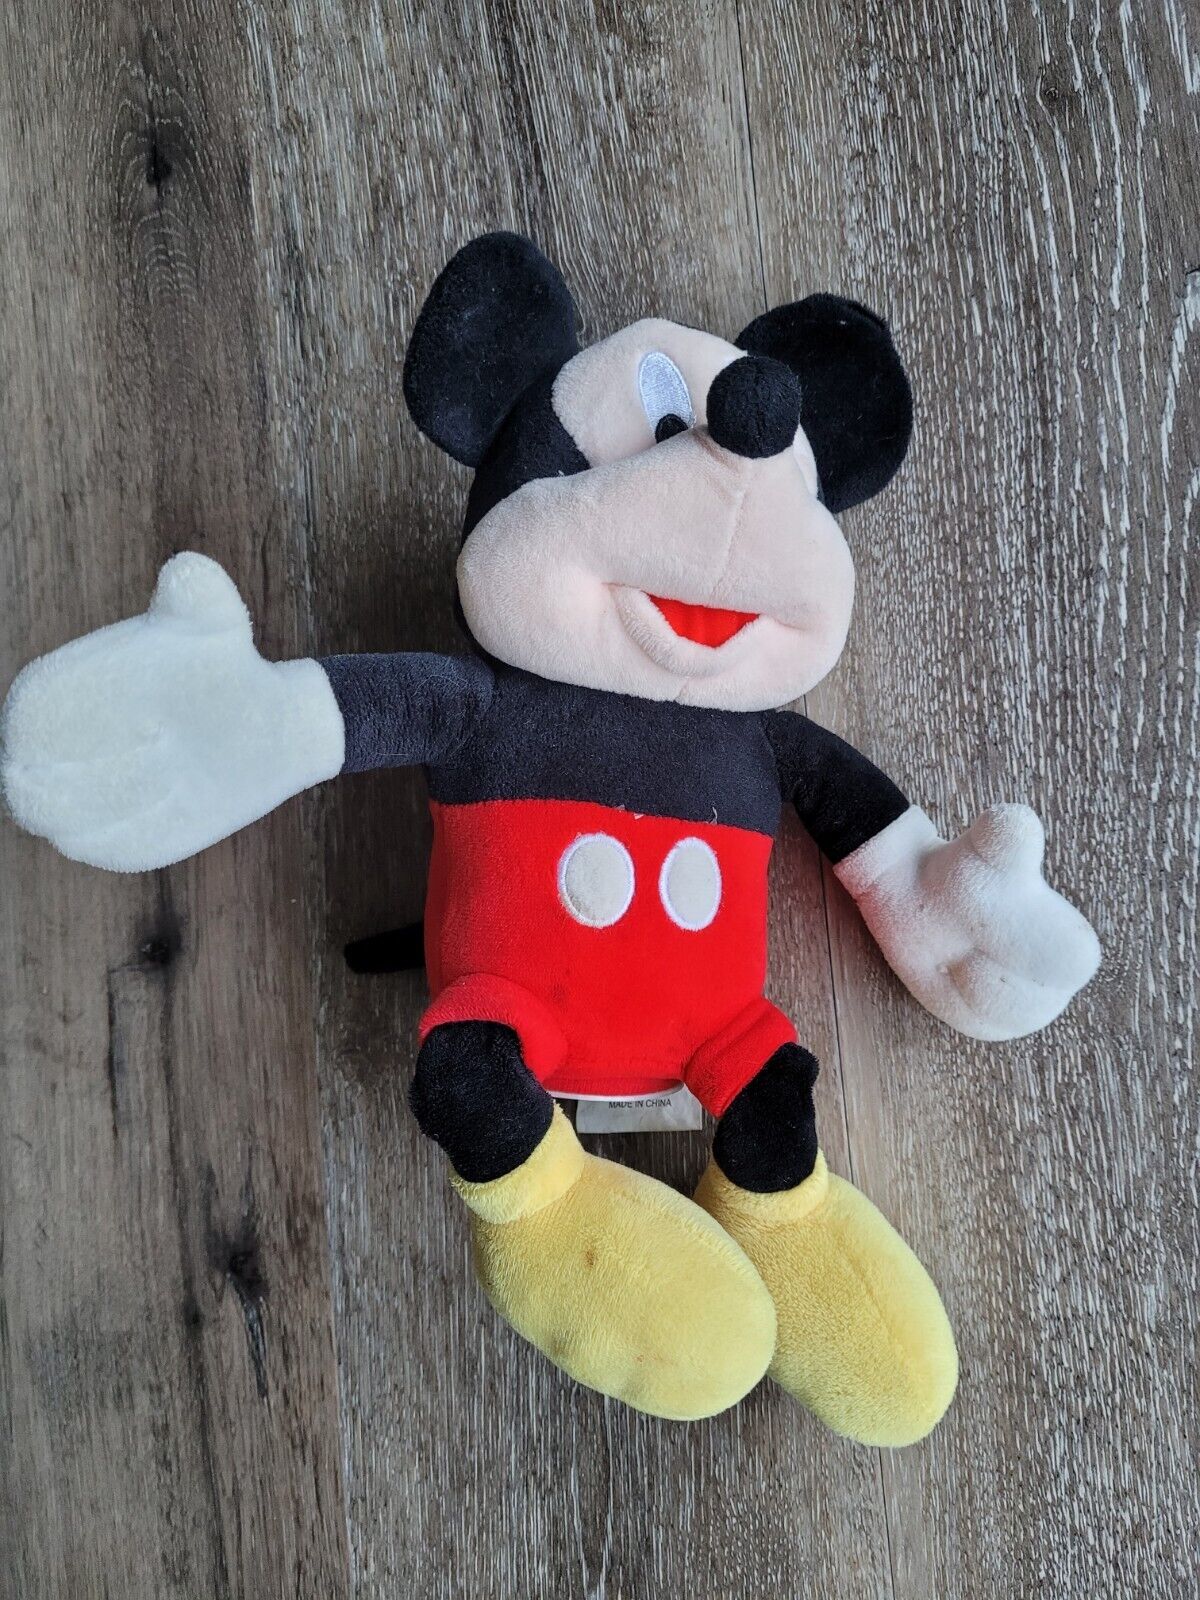 Disney Fab NY Mickey Mouse Coin Bank Plush Shelf Sitting With Stopper Intact